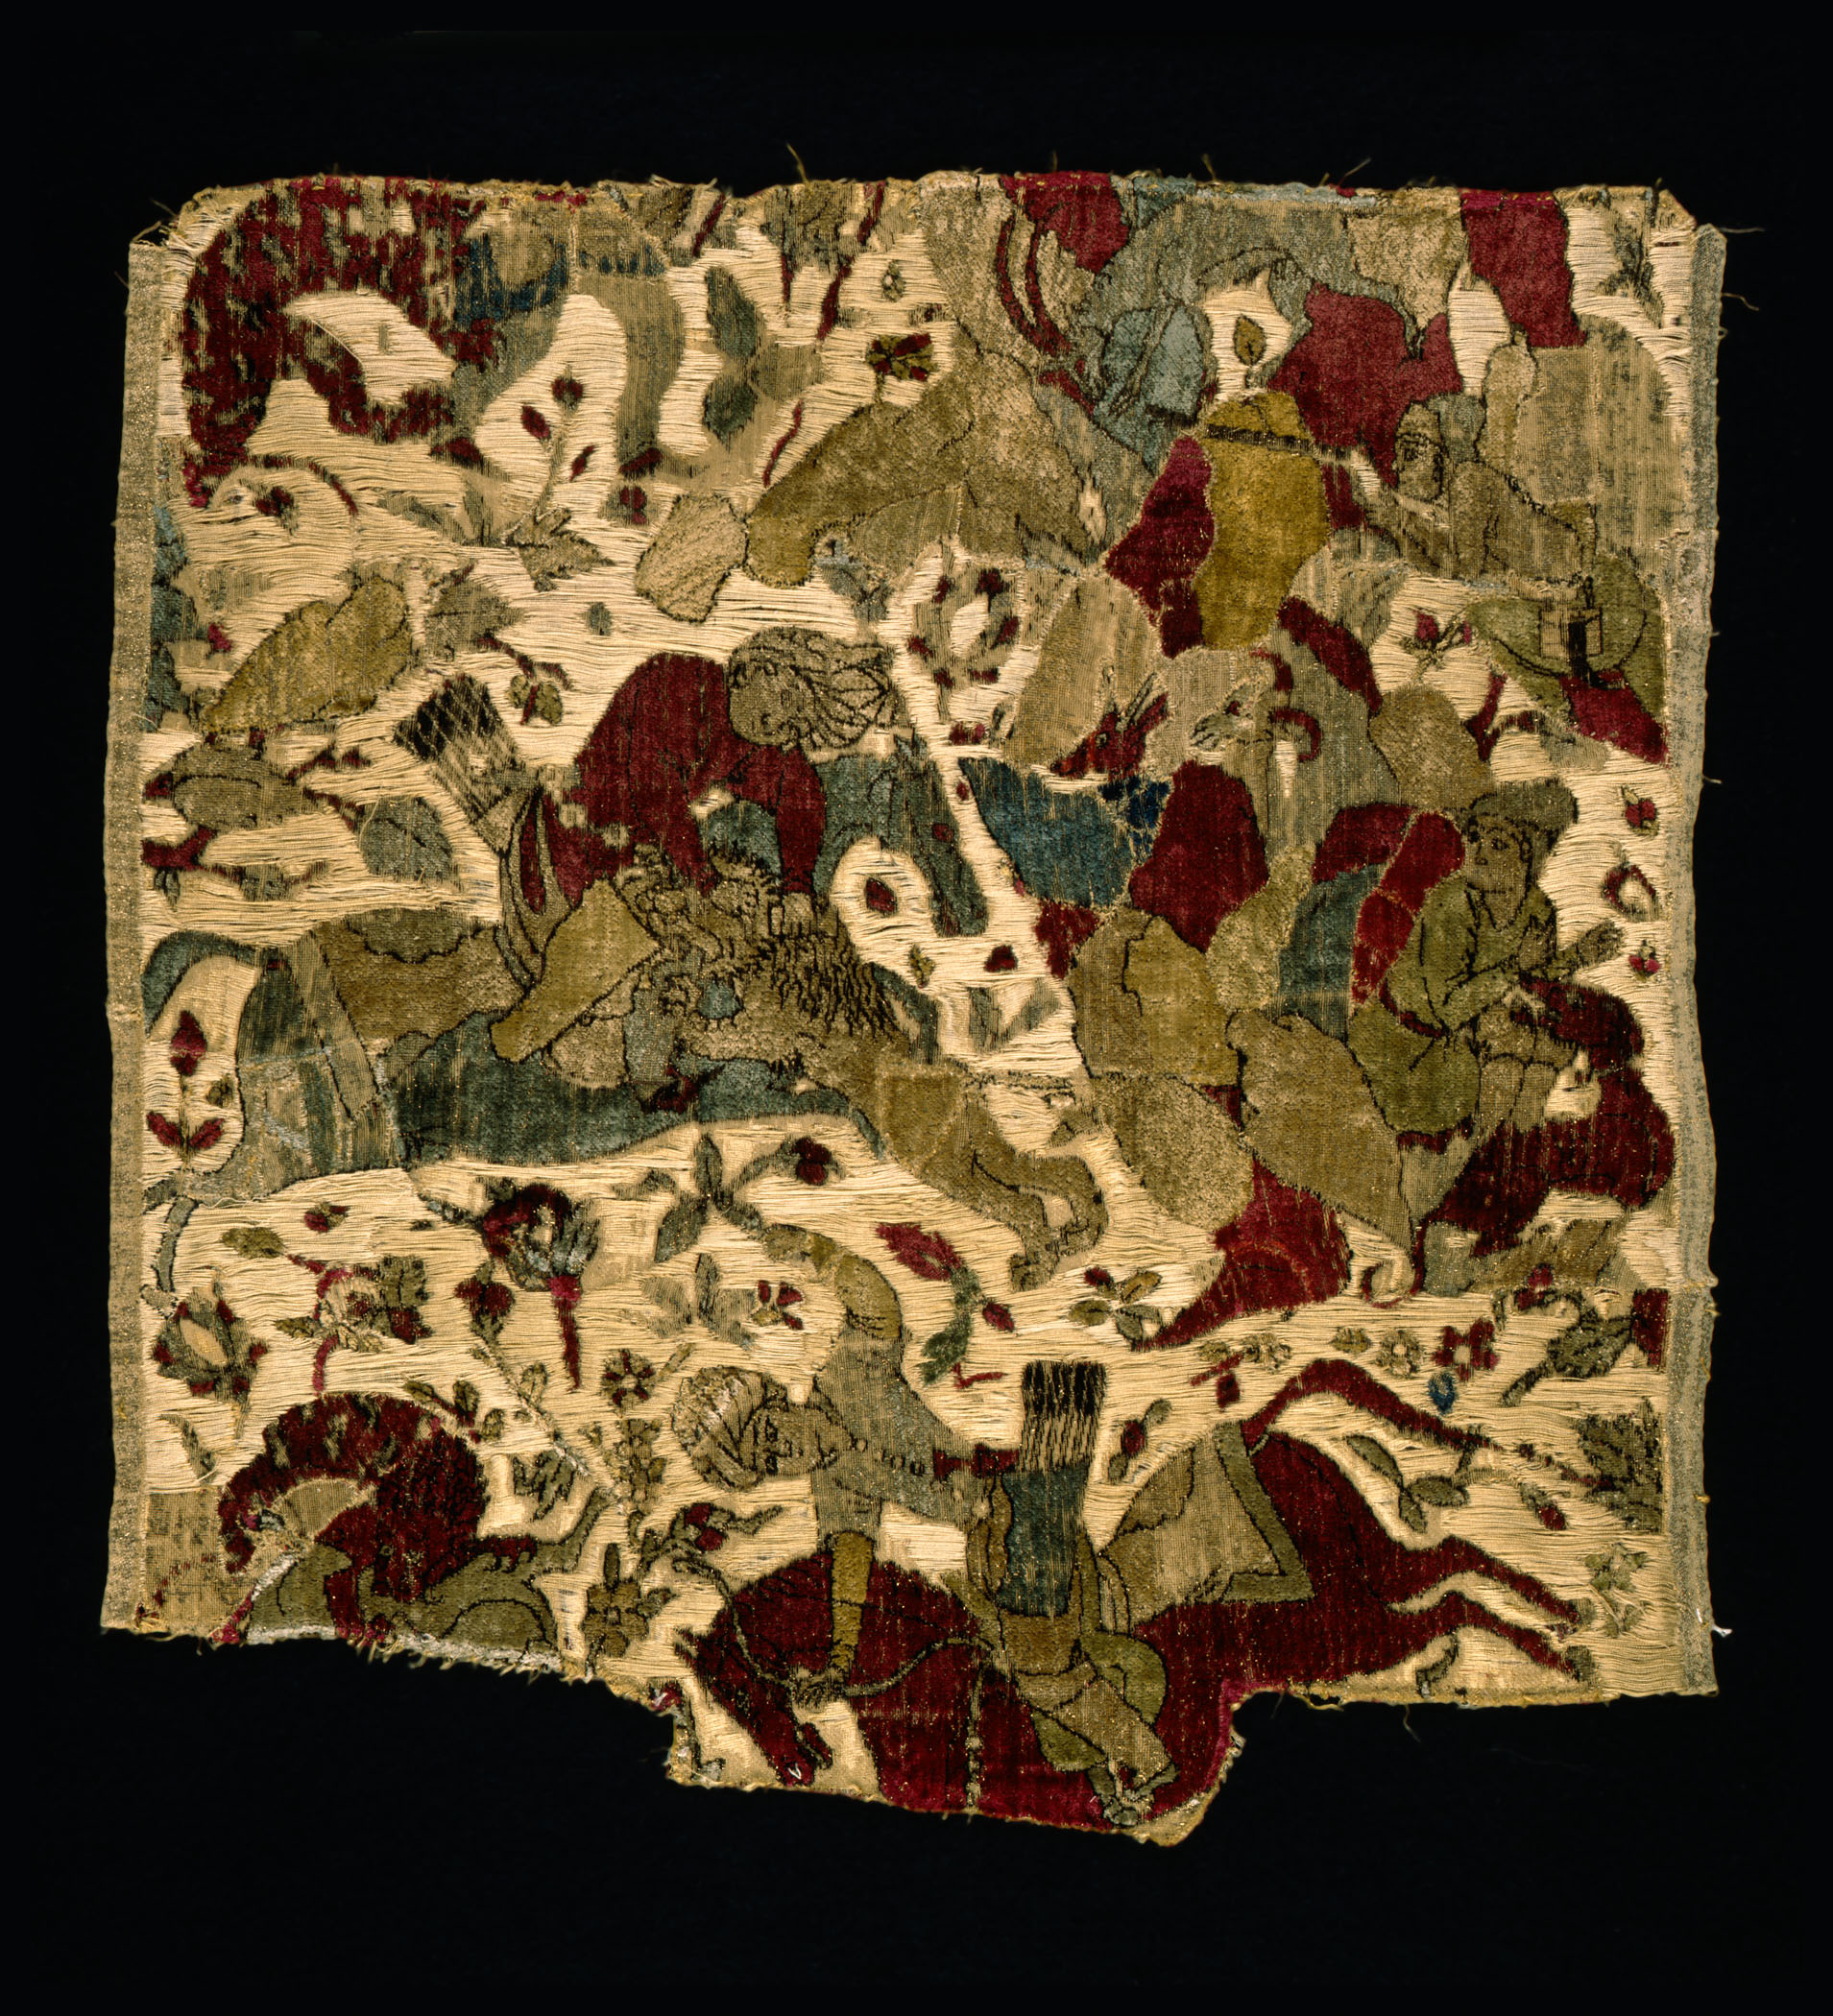 A rich textured velvet piece of cloth with blurred depictions animal and human shaped figures.